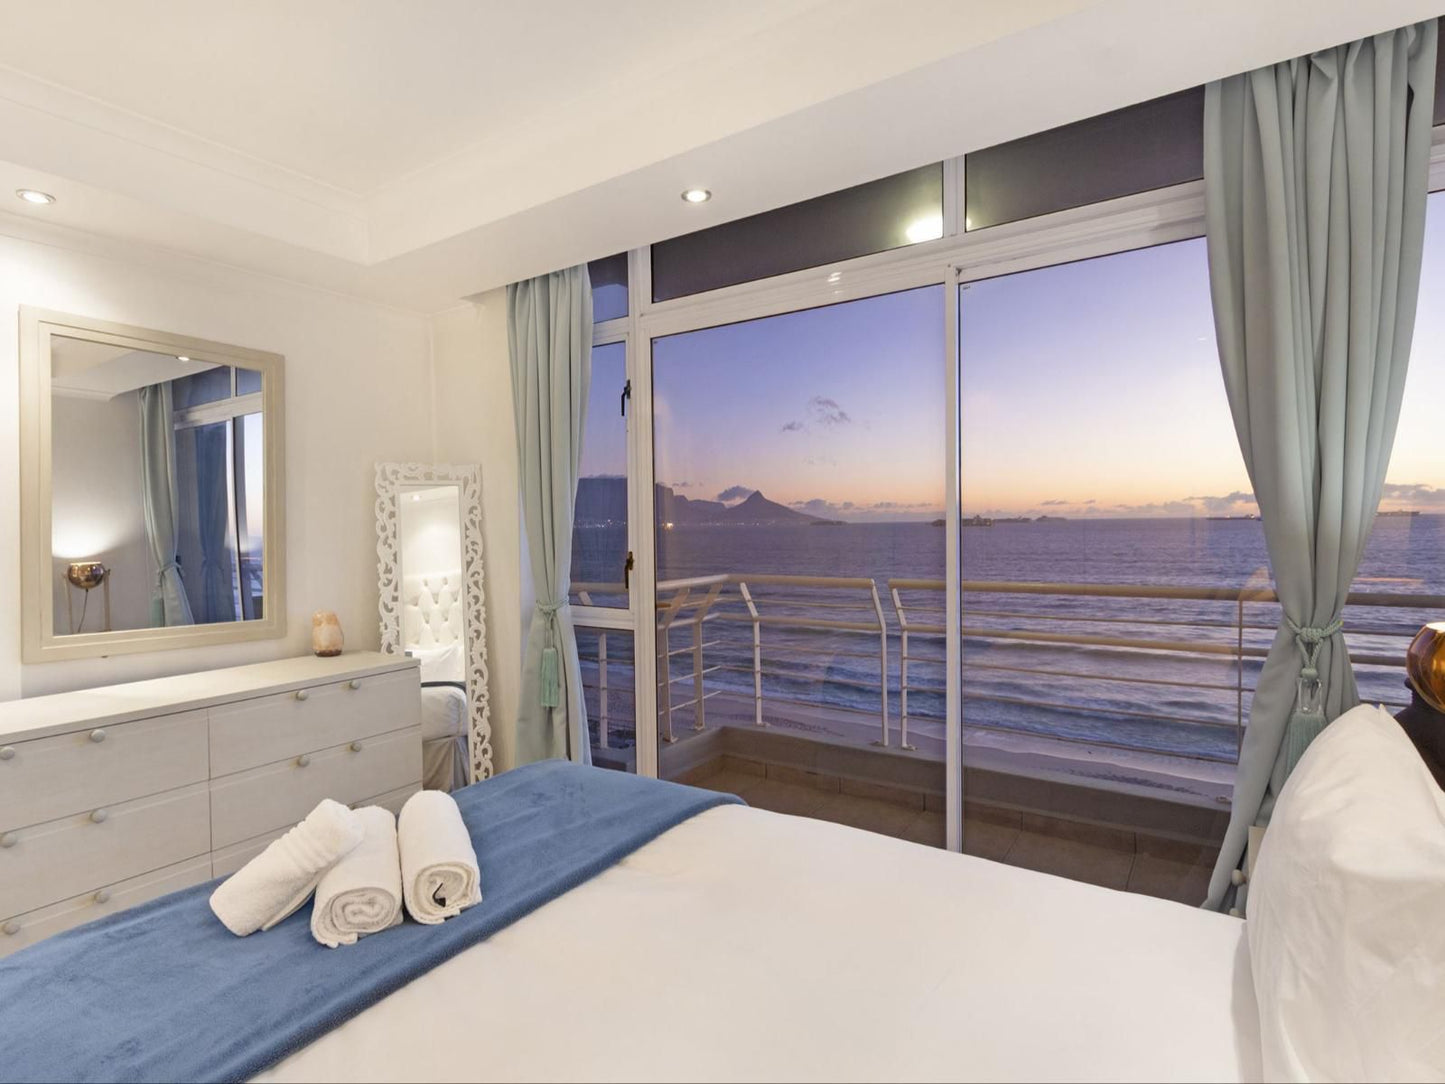 Ocean View C702 By Hostagents Bloubergrant Blouberg Western Cape South Africa Bedroom